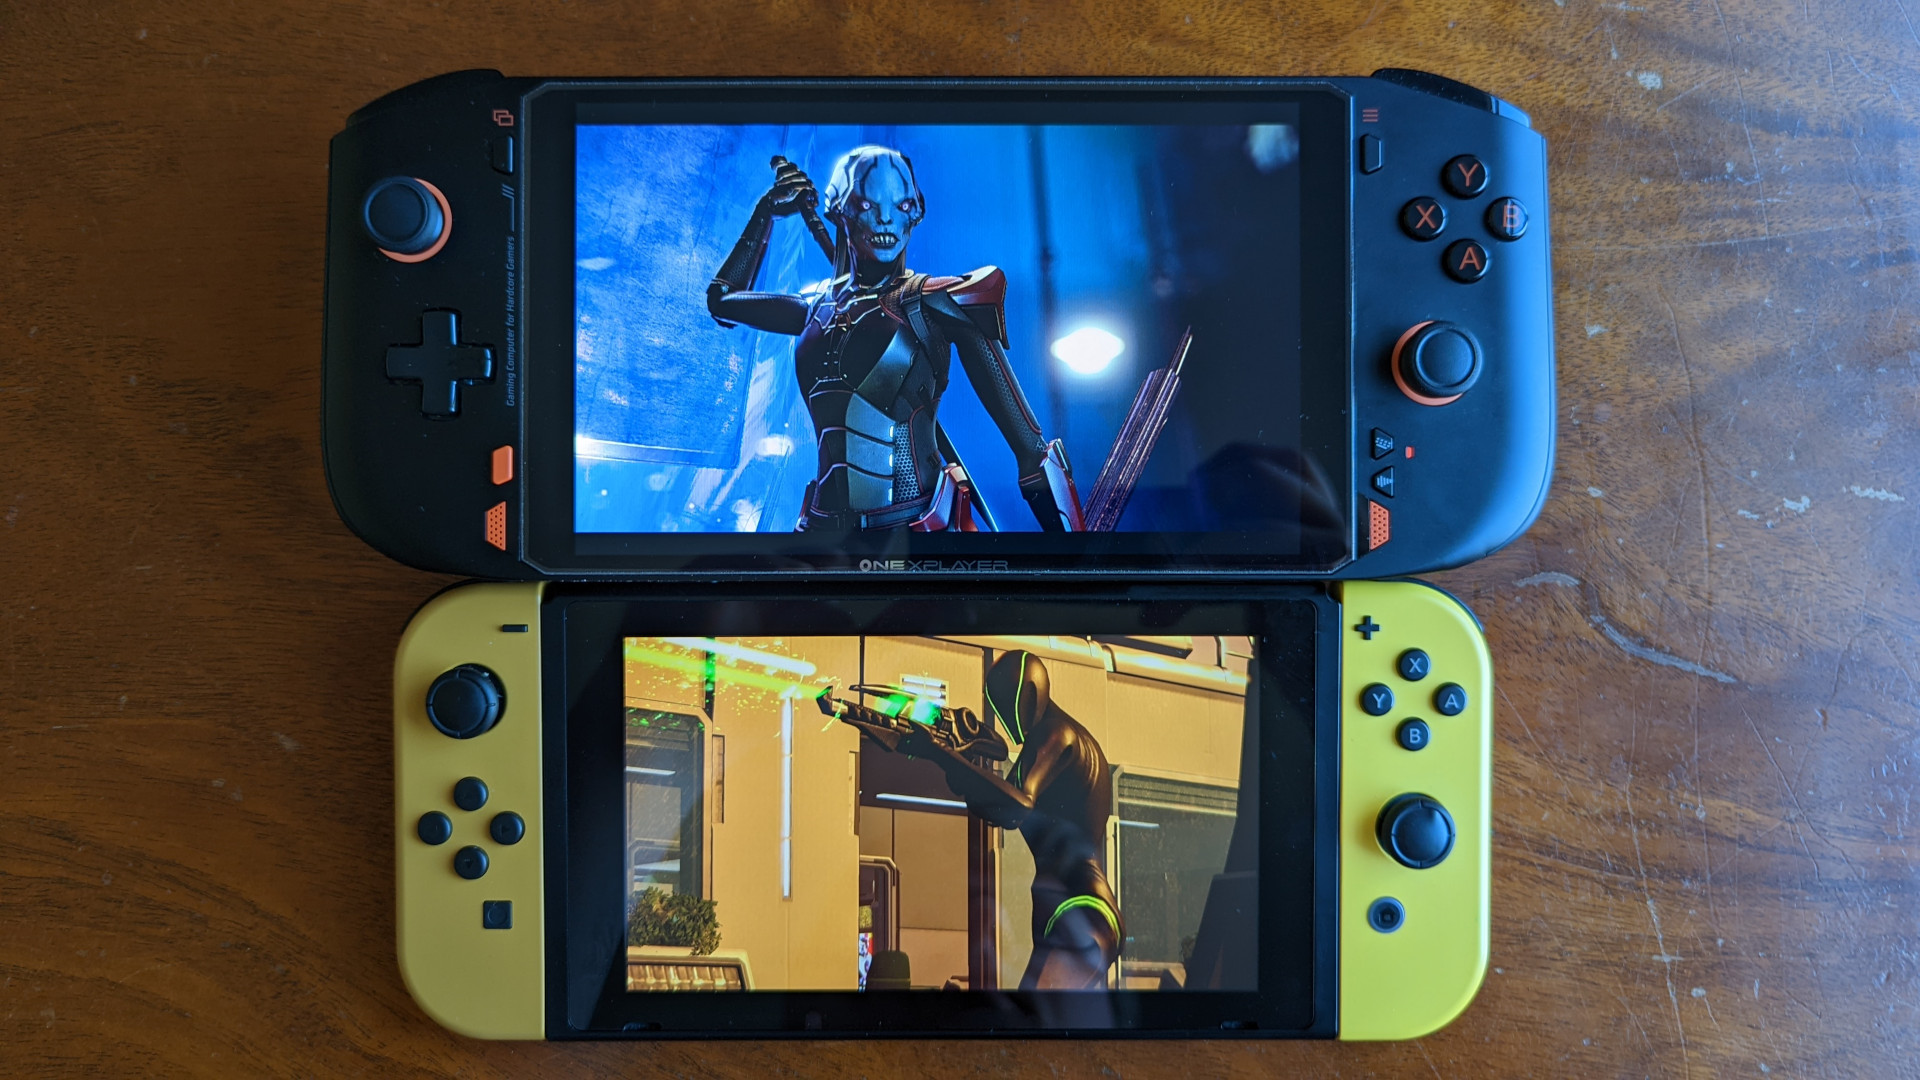 OneXPlayer Mini AMD review: A size comparison between the handheld PC (top) and the Nintendo Switch (bottom)